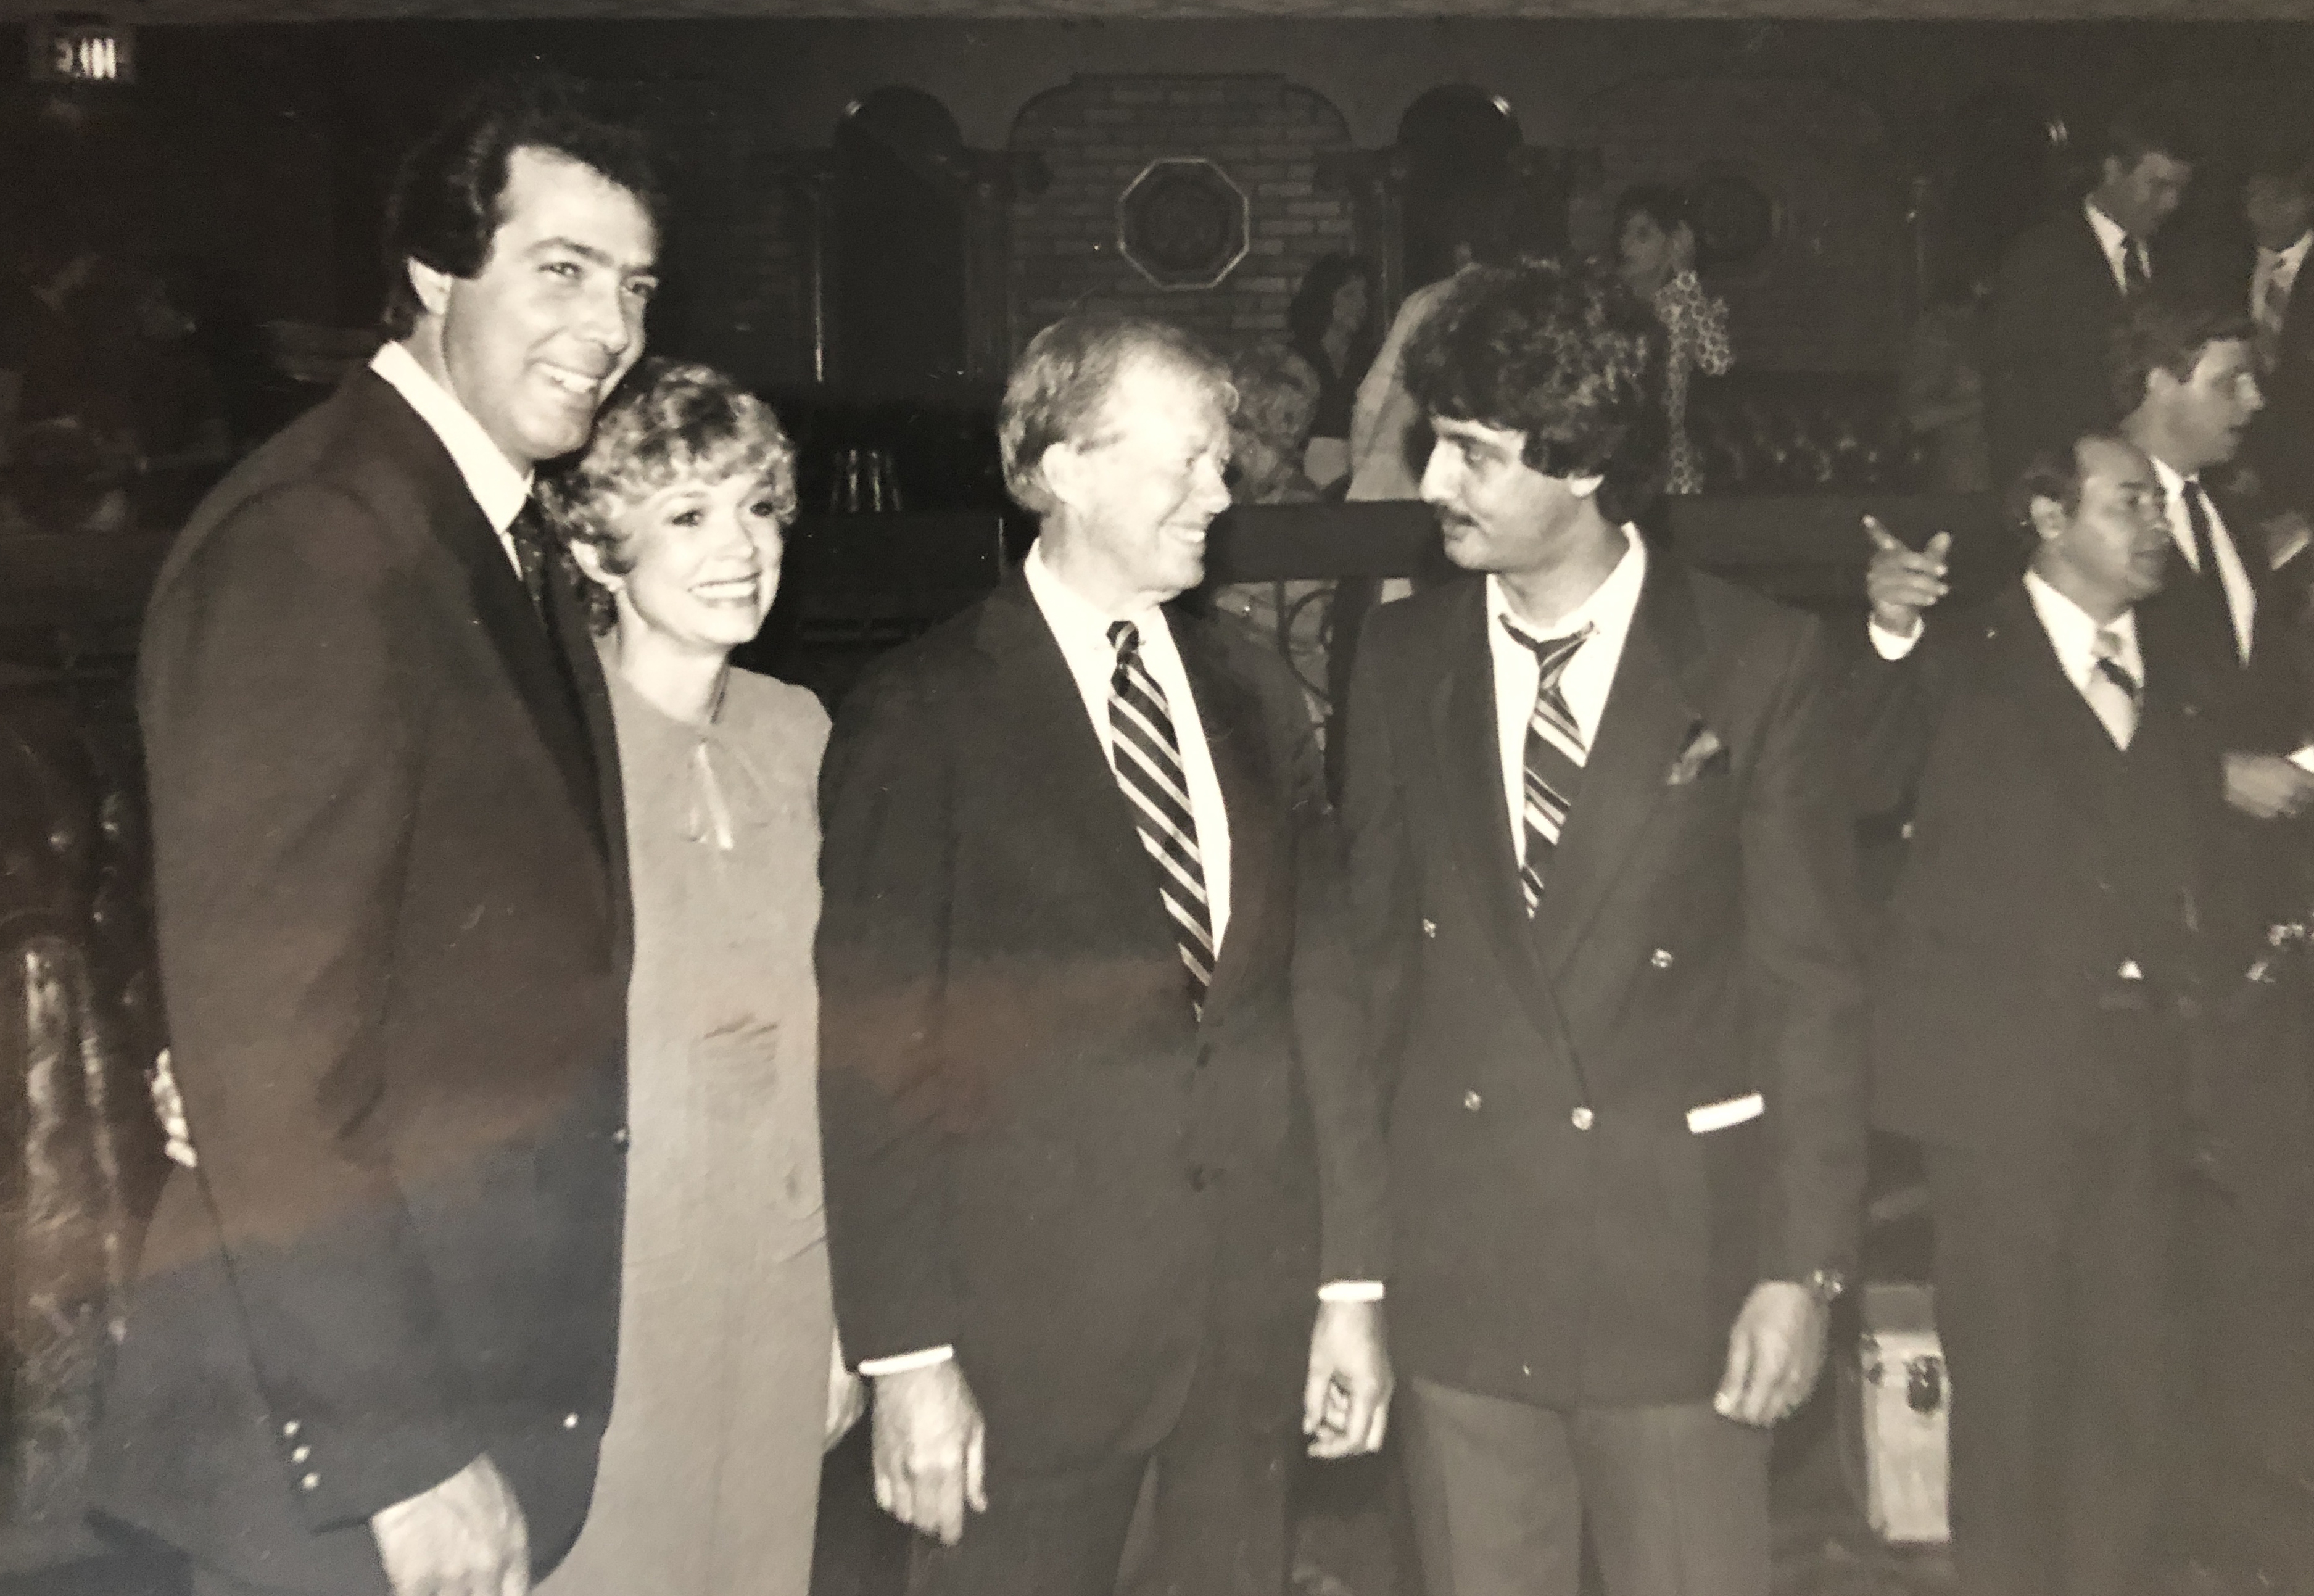 Interviewing former U.S. President Jimmy Carter and former Congressman Marty Russo in 1979. Photo courtesy of Ray Hanania